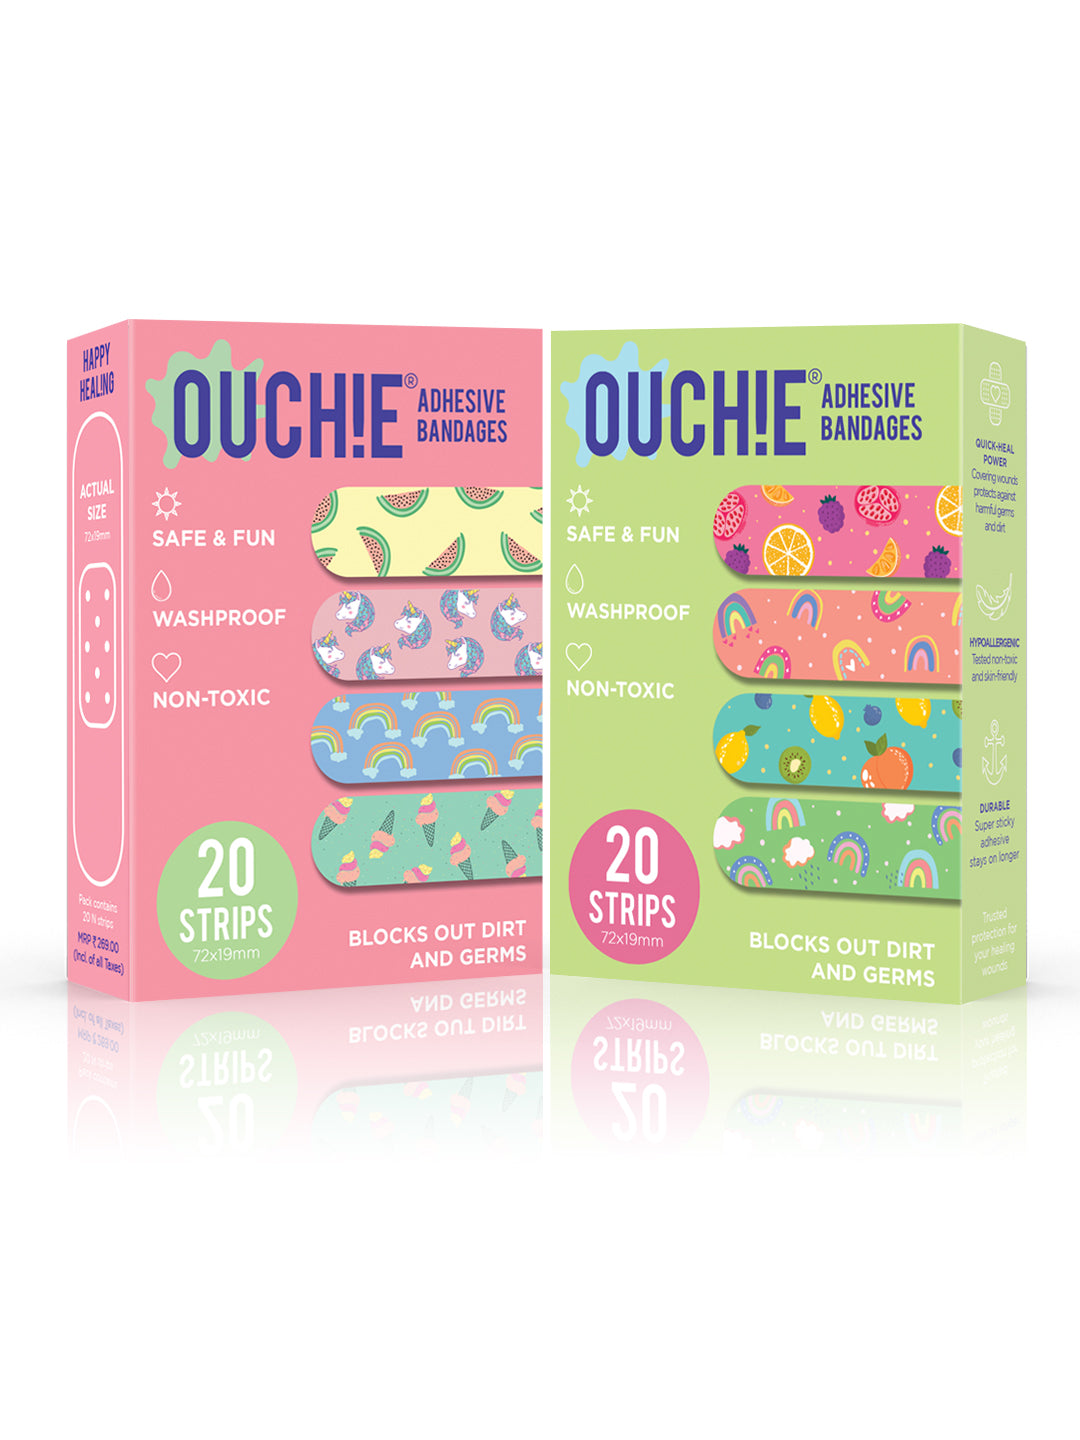 Ouchie Non-Toxic Printed Bandages Double Combo Set (40 Pack) - Pink & Lime Green